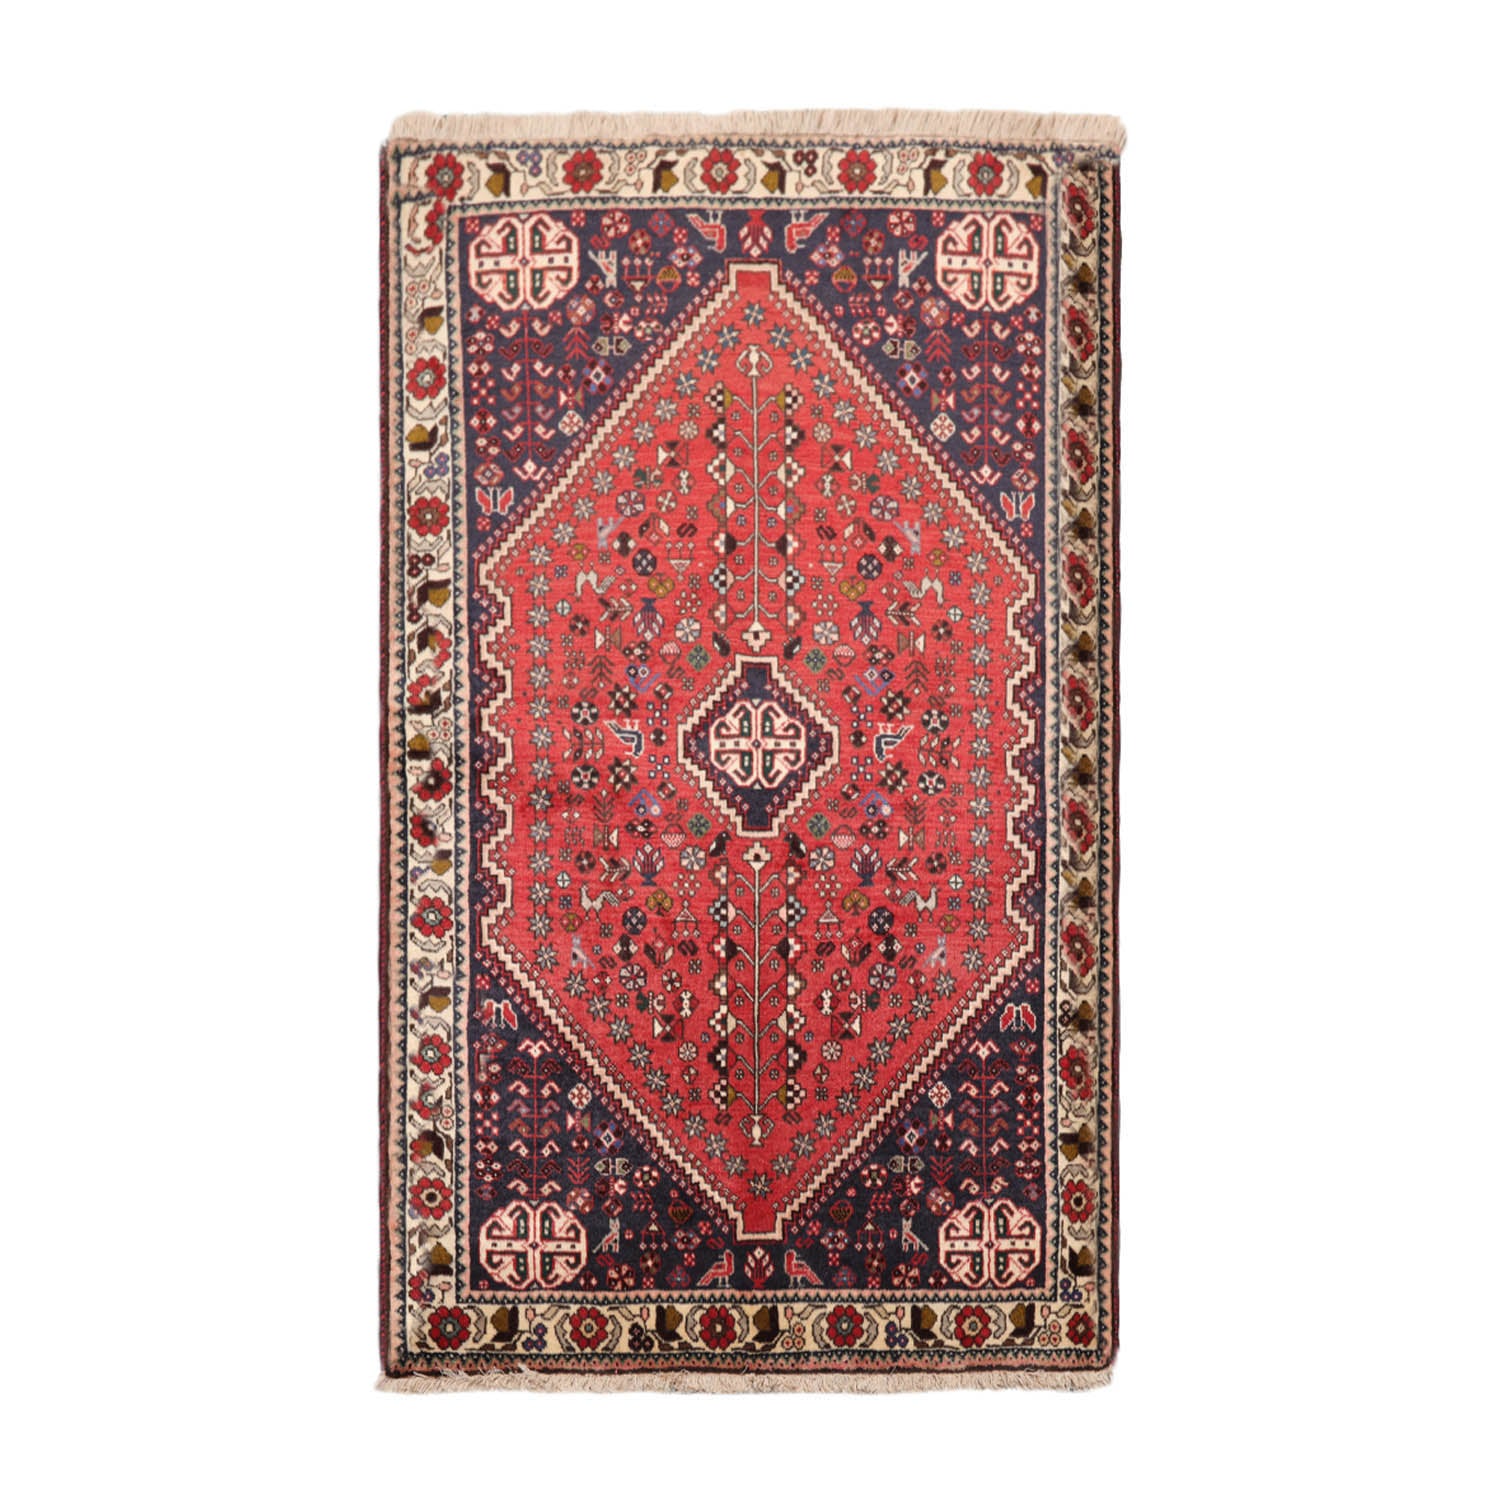 Lecharles 4x6 Hand Knotted 100% Wool Abadeh Traditional 200 KPSI Oriental Area Rug Coral, Indigo Color